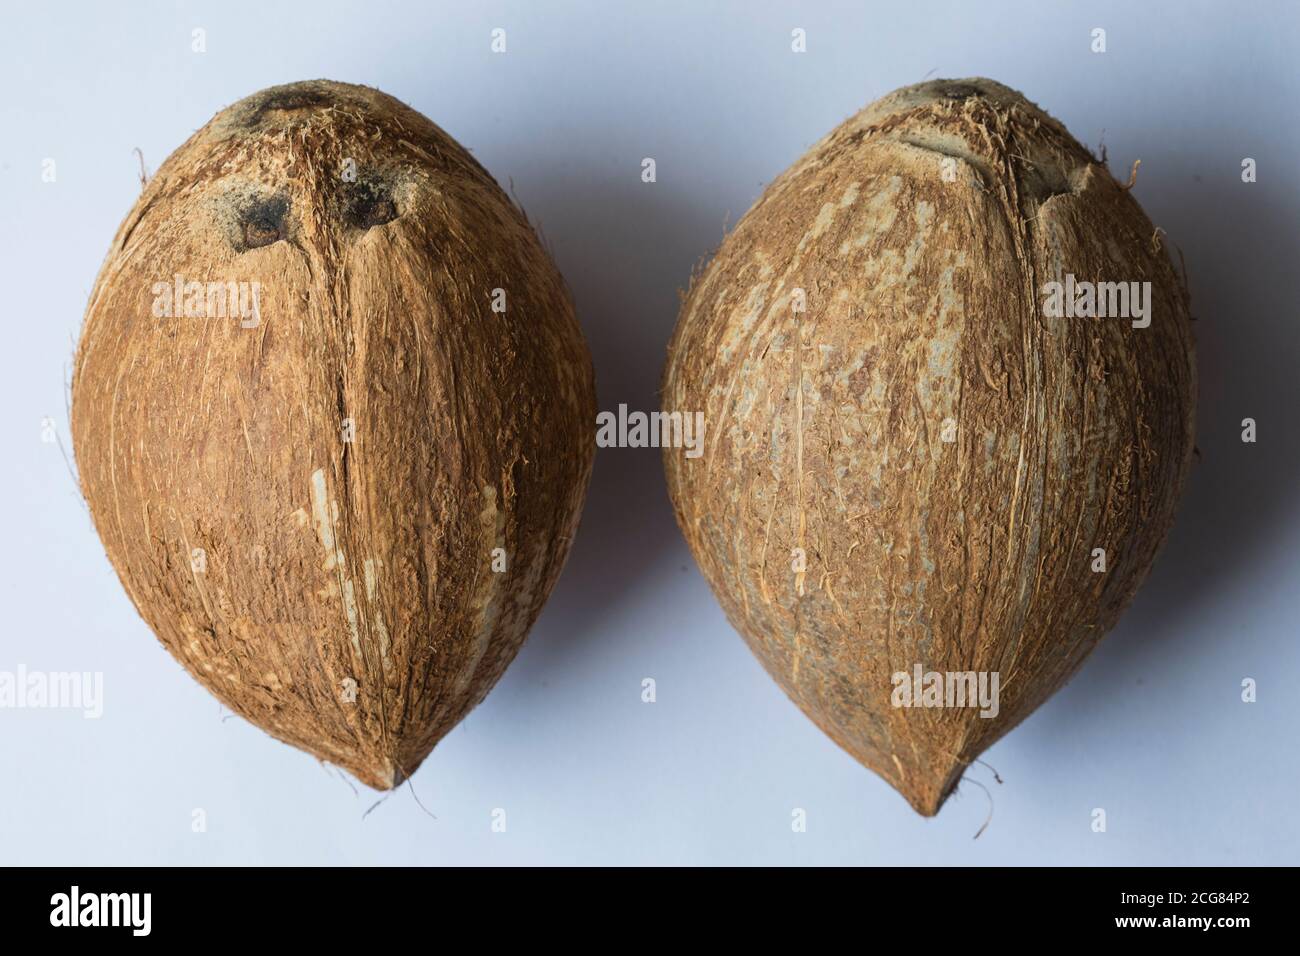 Two whole raw coconuts isolated on white background. Stock Photo